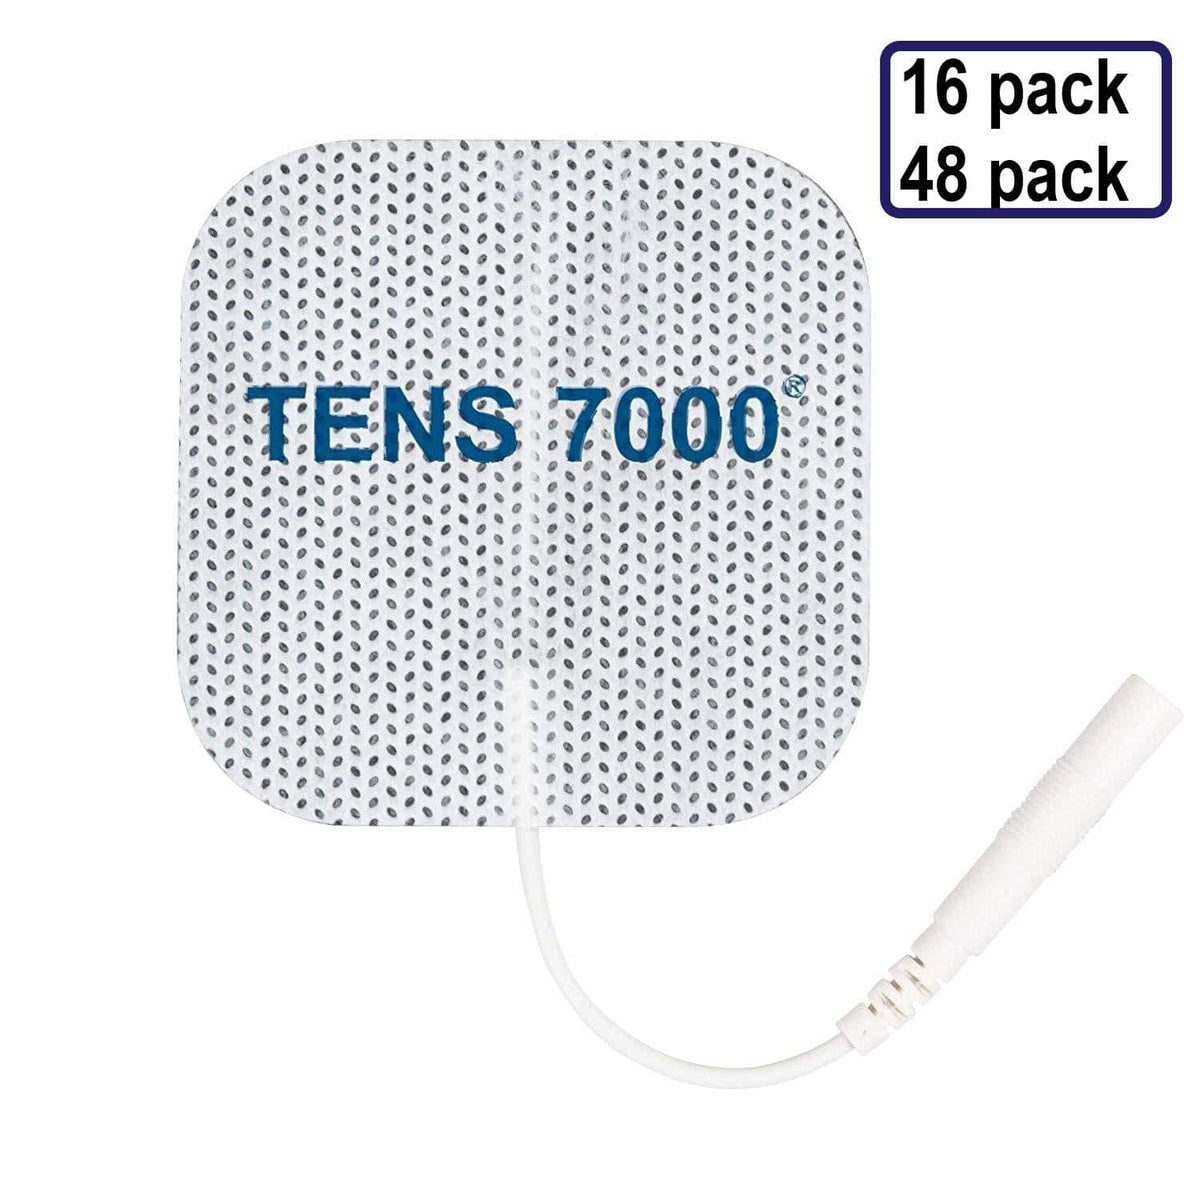 When to Replace TENS 7000 Pads: The Ultimate Test 